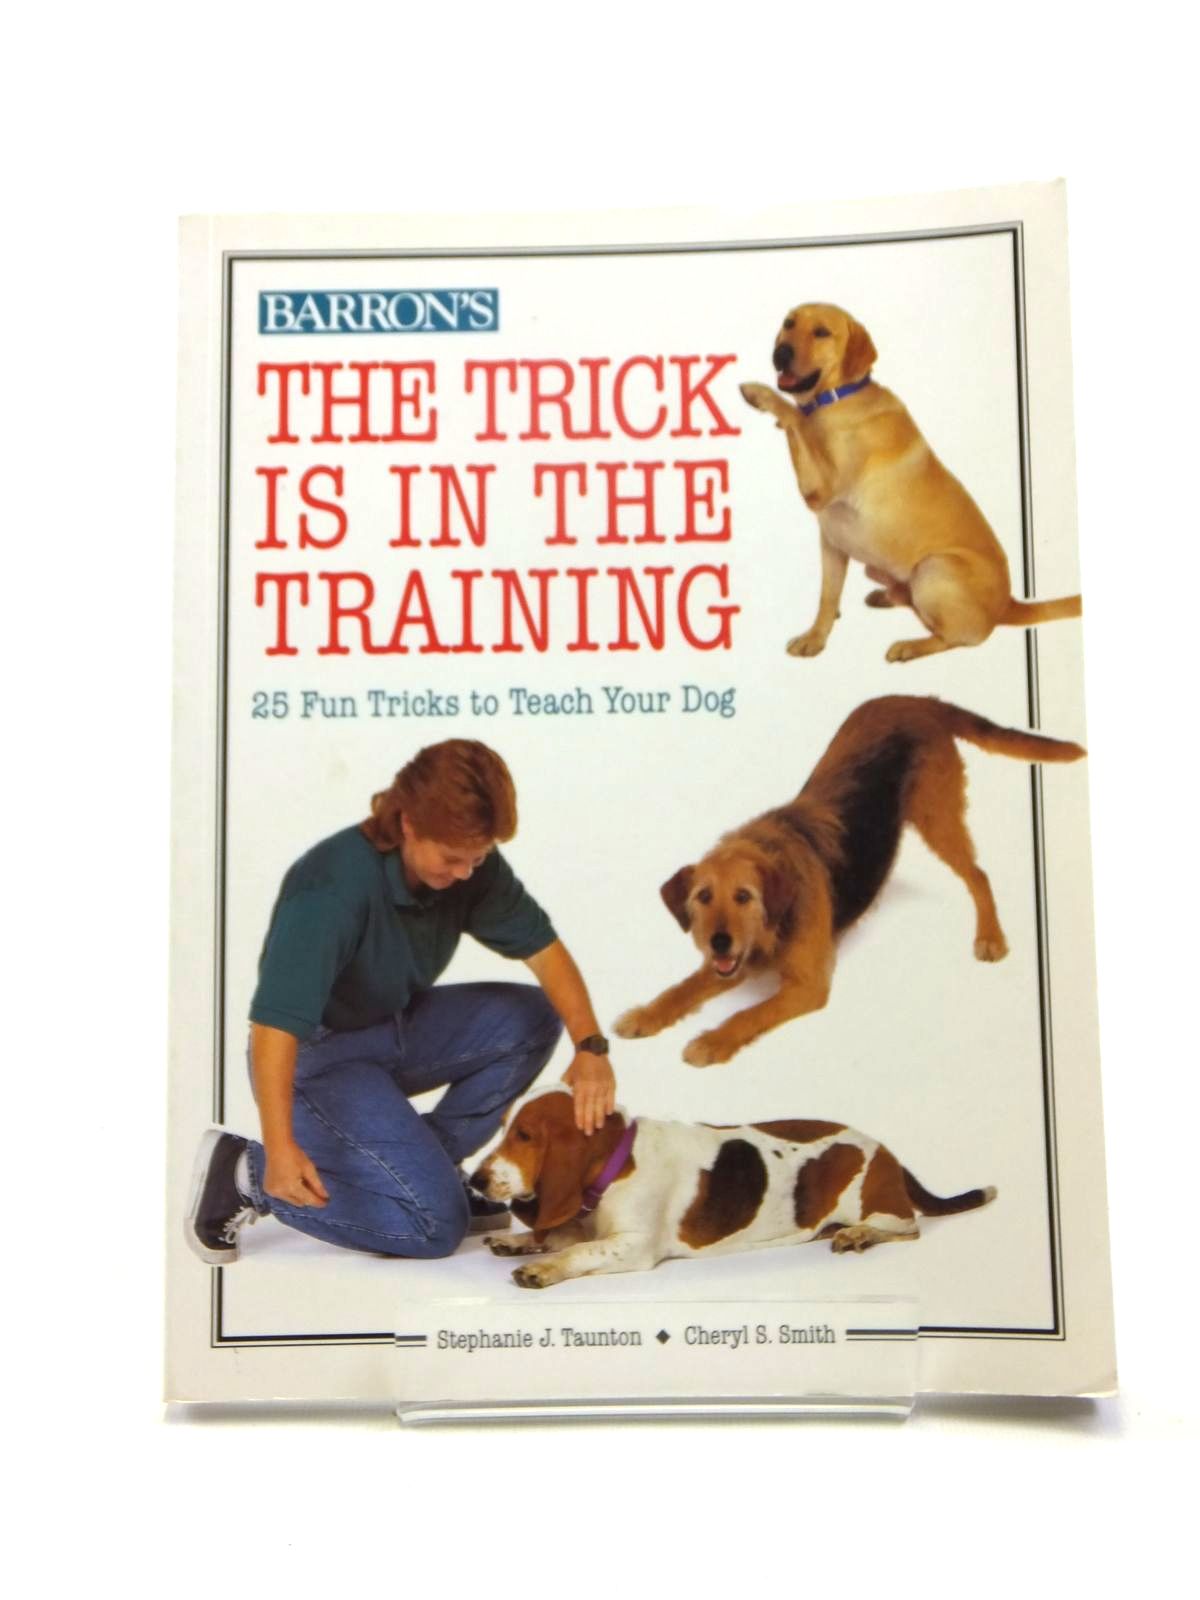 TAUNTON, STEPHANIE J. & SMITH, CHERYL S. - The Trick Is in the Training